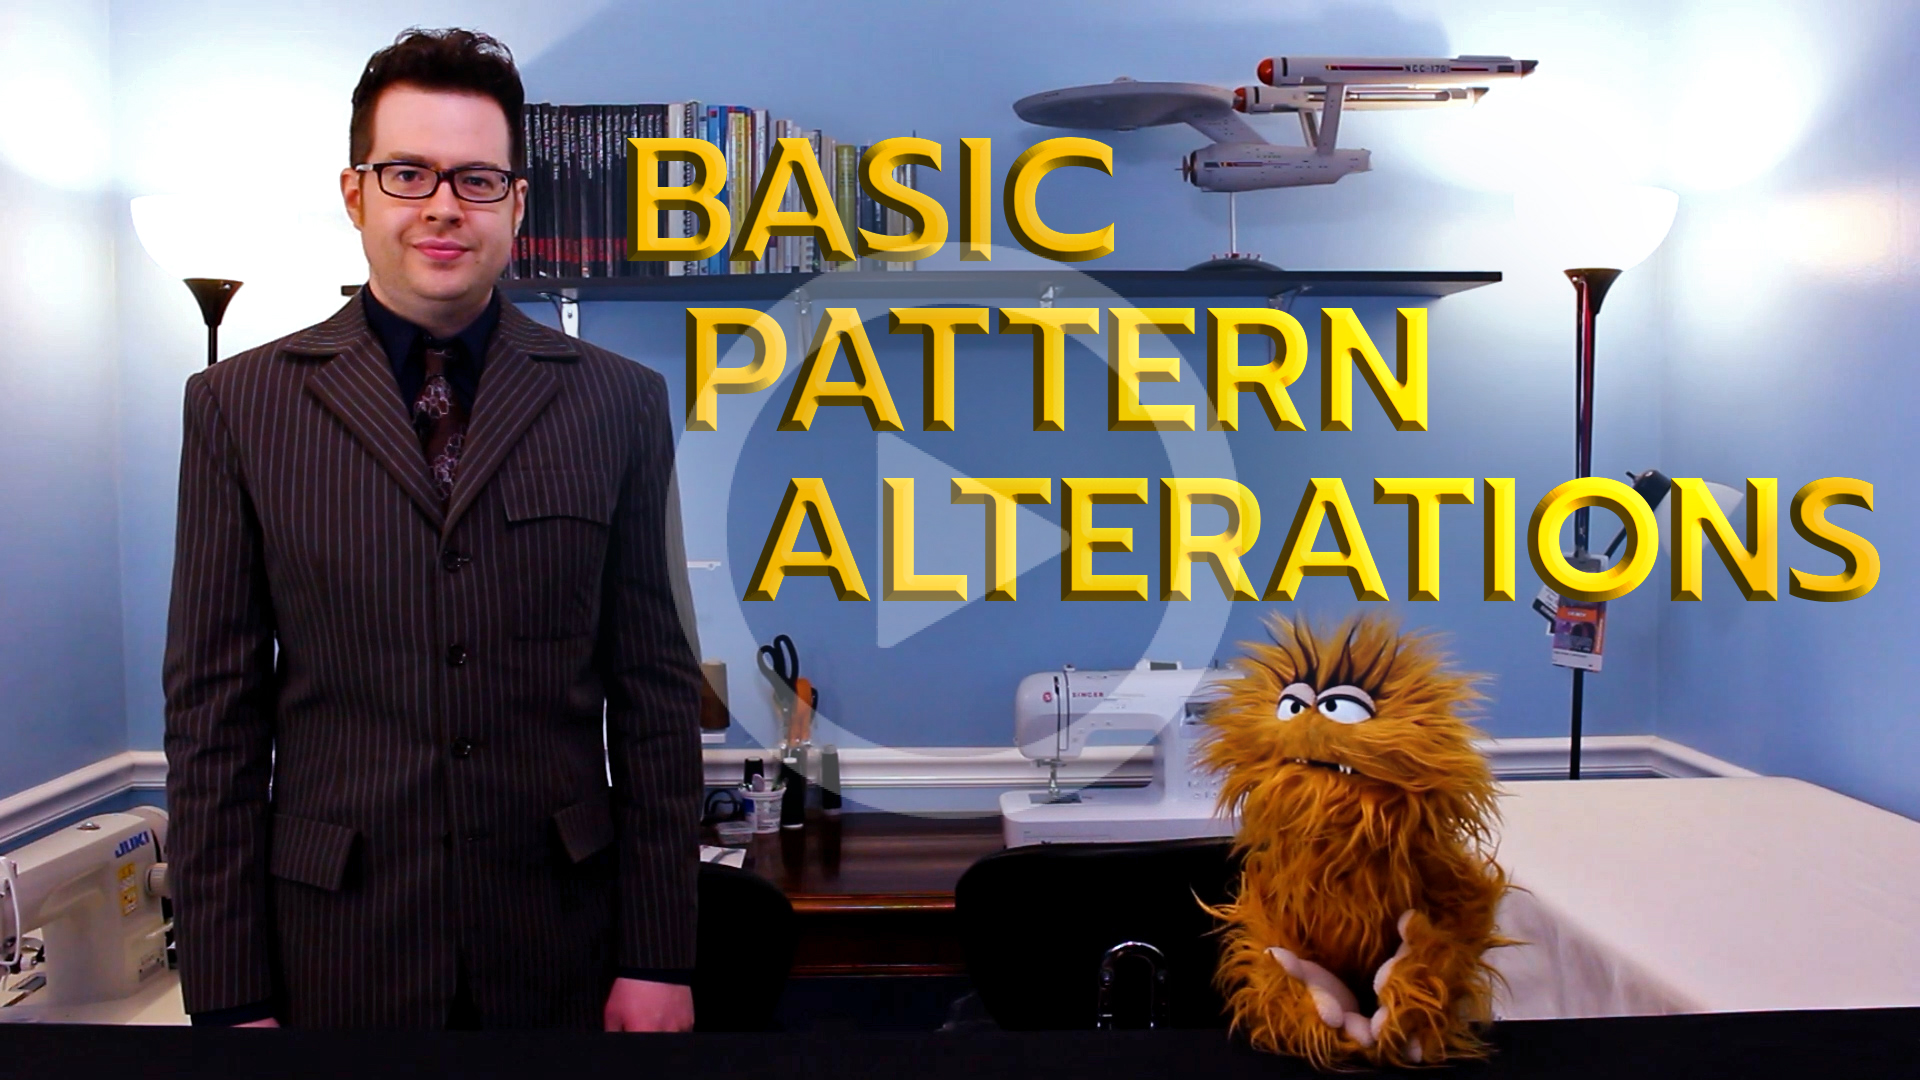 Basic Pattern Alterations Sewing Lesson - Tailors Gone Wild